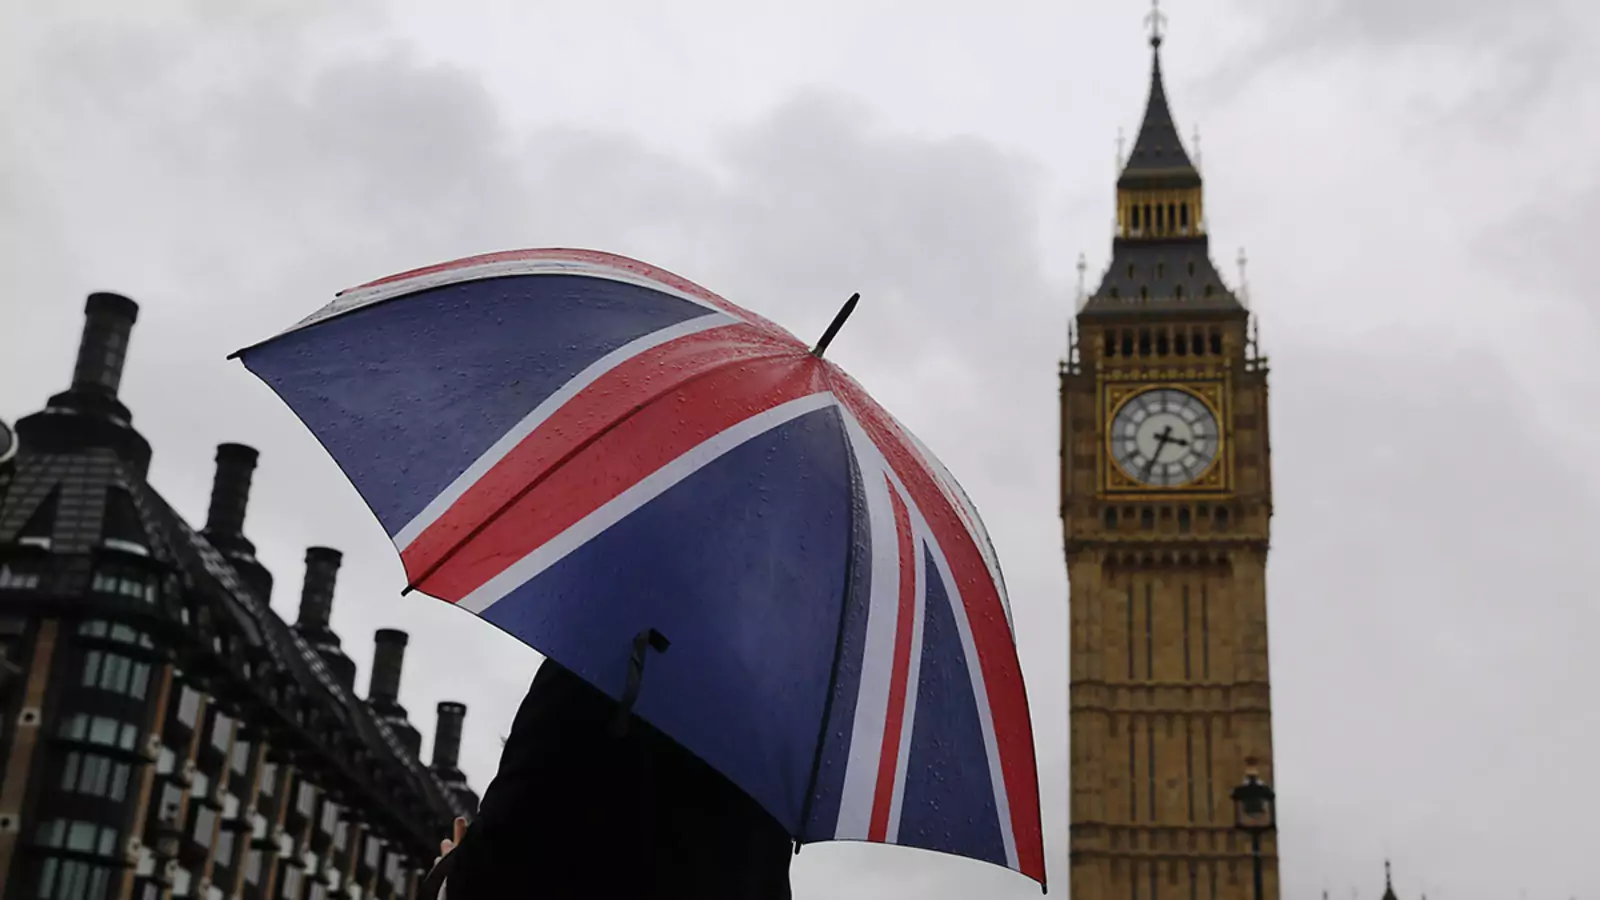 A woman holds a Union flag umbrella in front of the Big Ben clock tower and the Houses of Parliament in London.